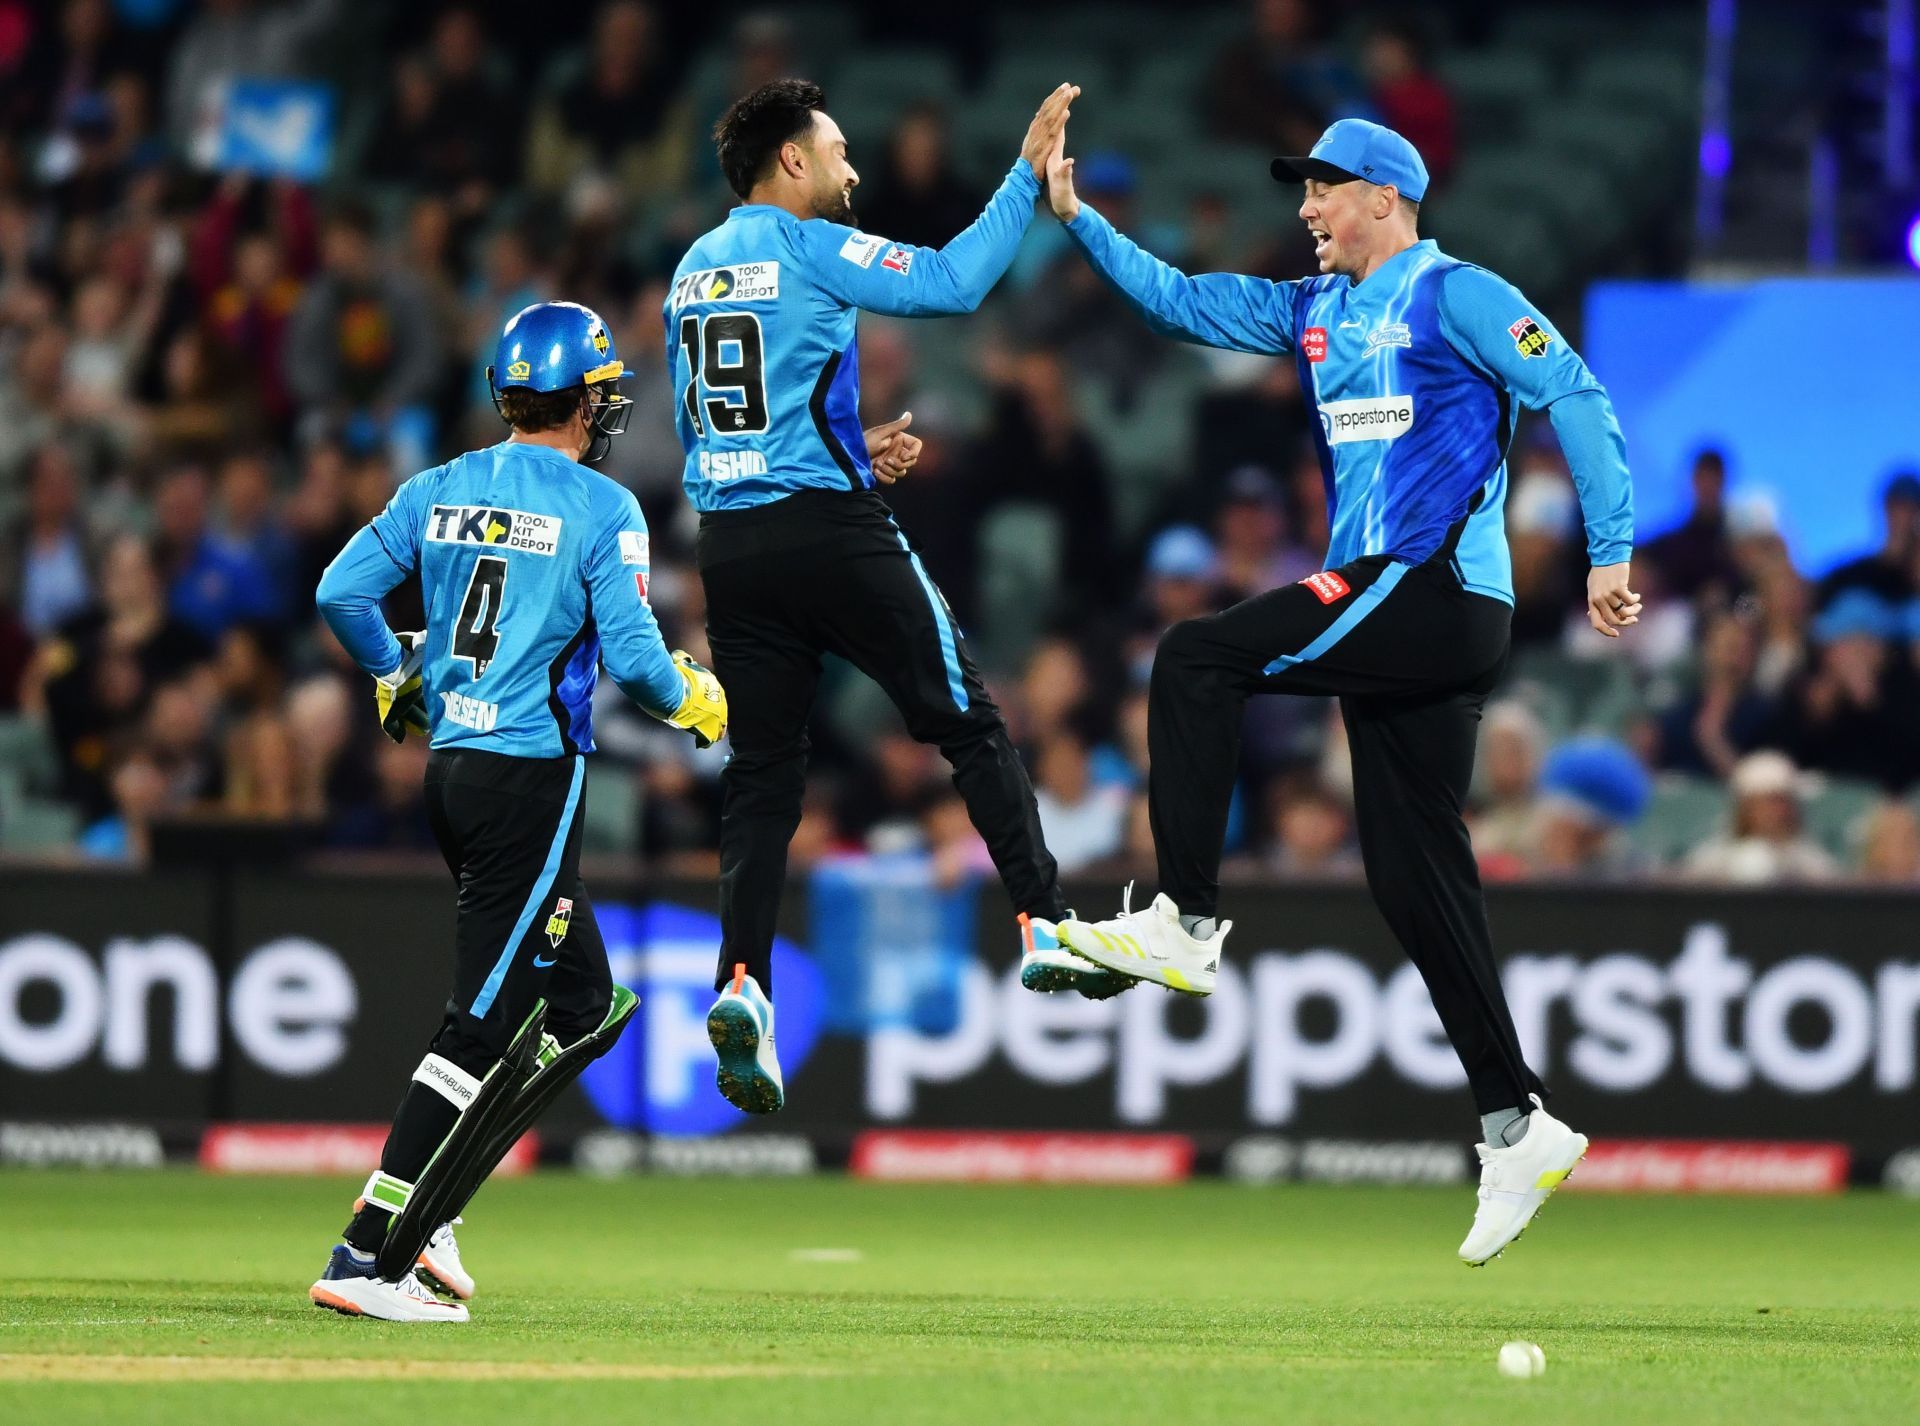 Adelaide Strikers celebrate a wicket. Pic: Getty Images